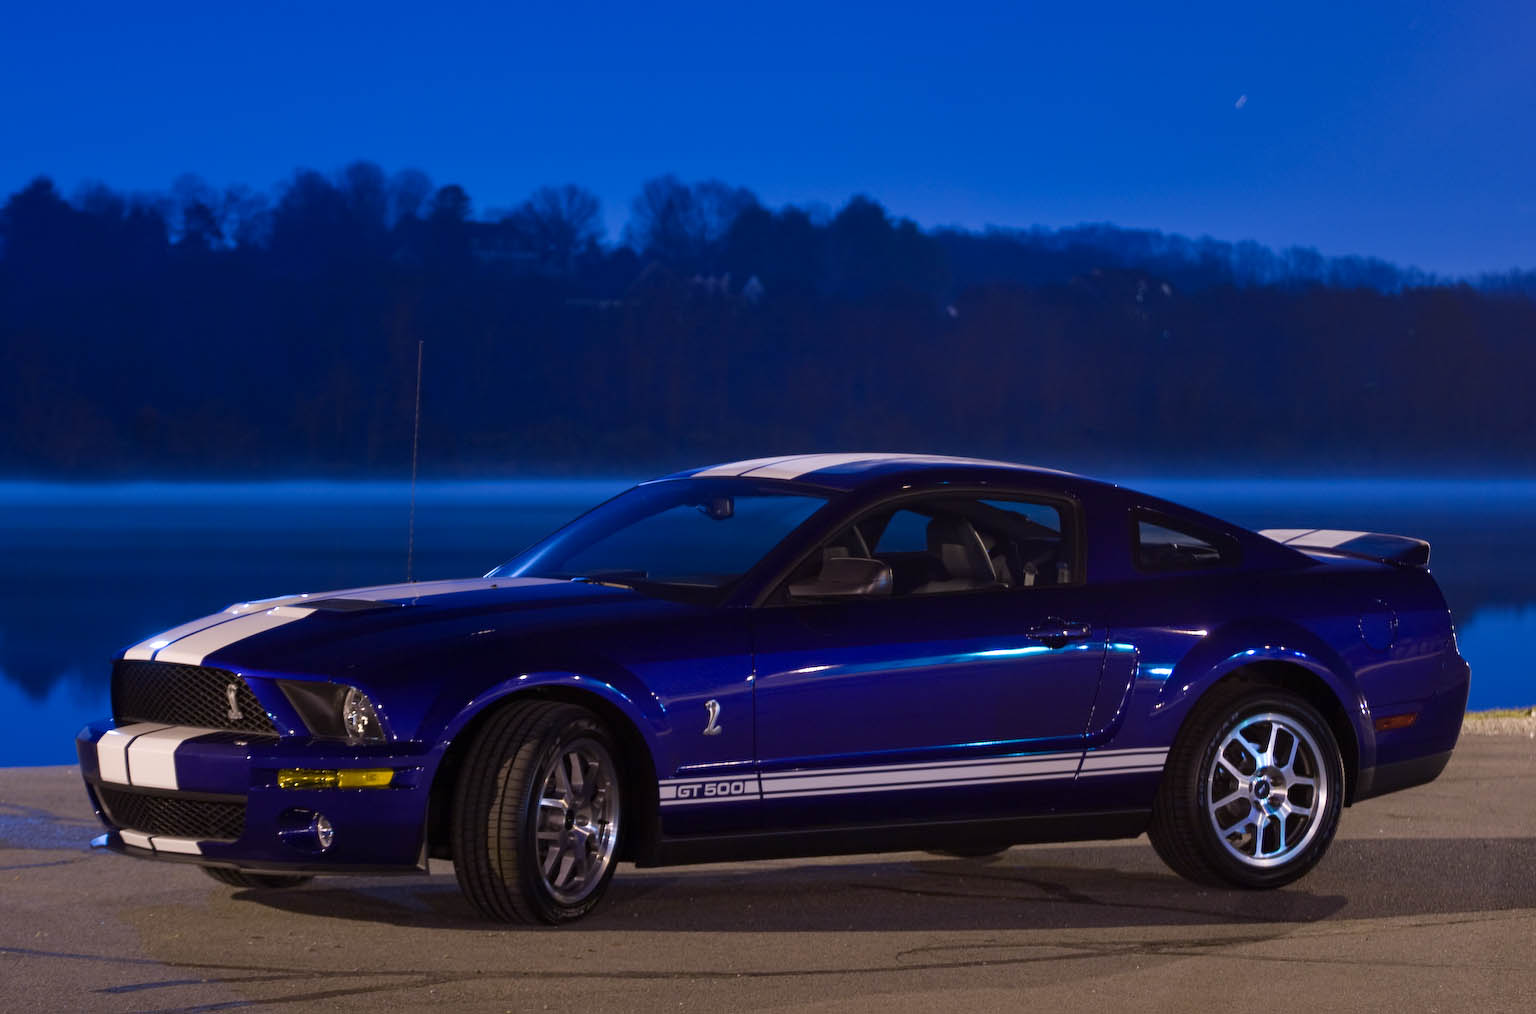  2009 Ford Mustang Shelby-GT500 